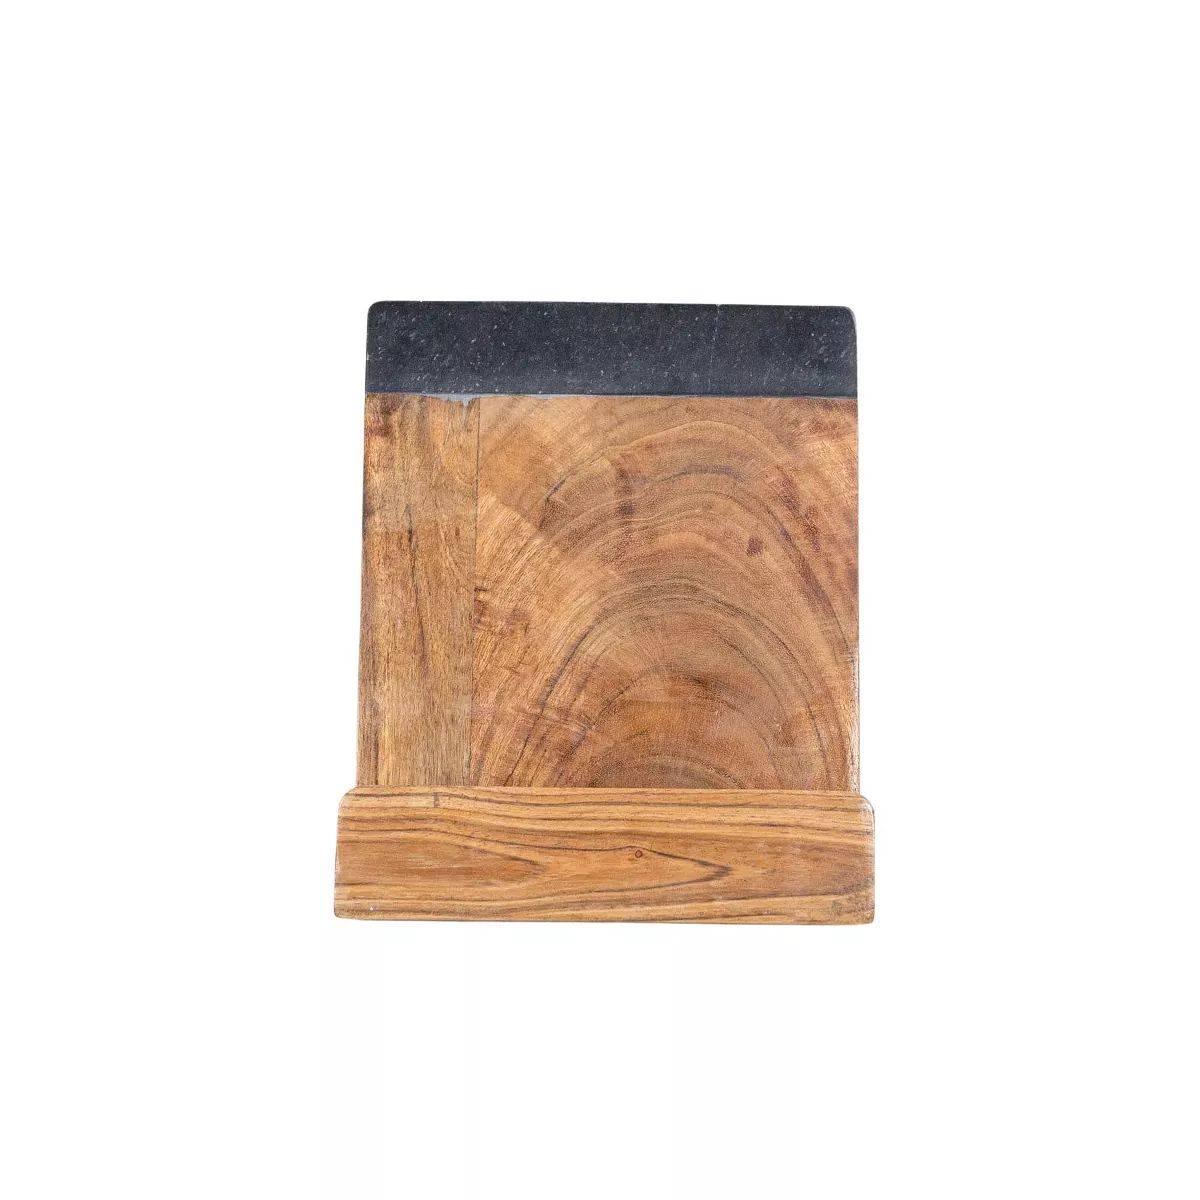 Cook Book Holder Acacia Wood, Marble & Metal by Foreside Home & Garden | Target